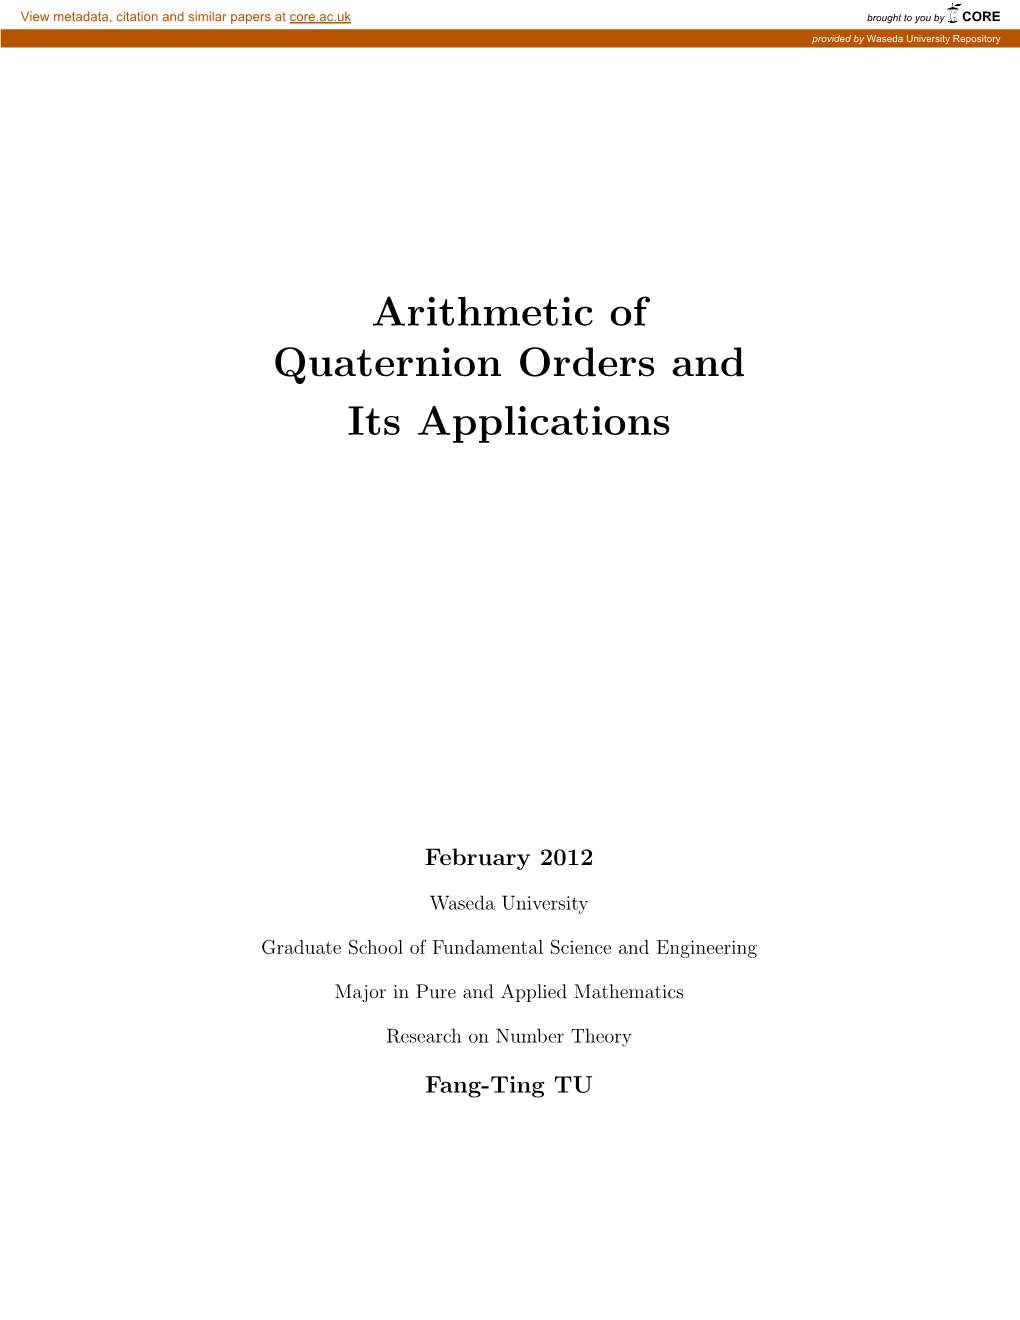 Arithmetic of Quaternion Orders and Its Applications